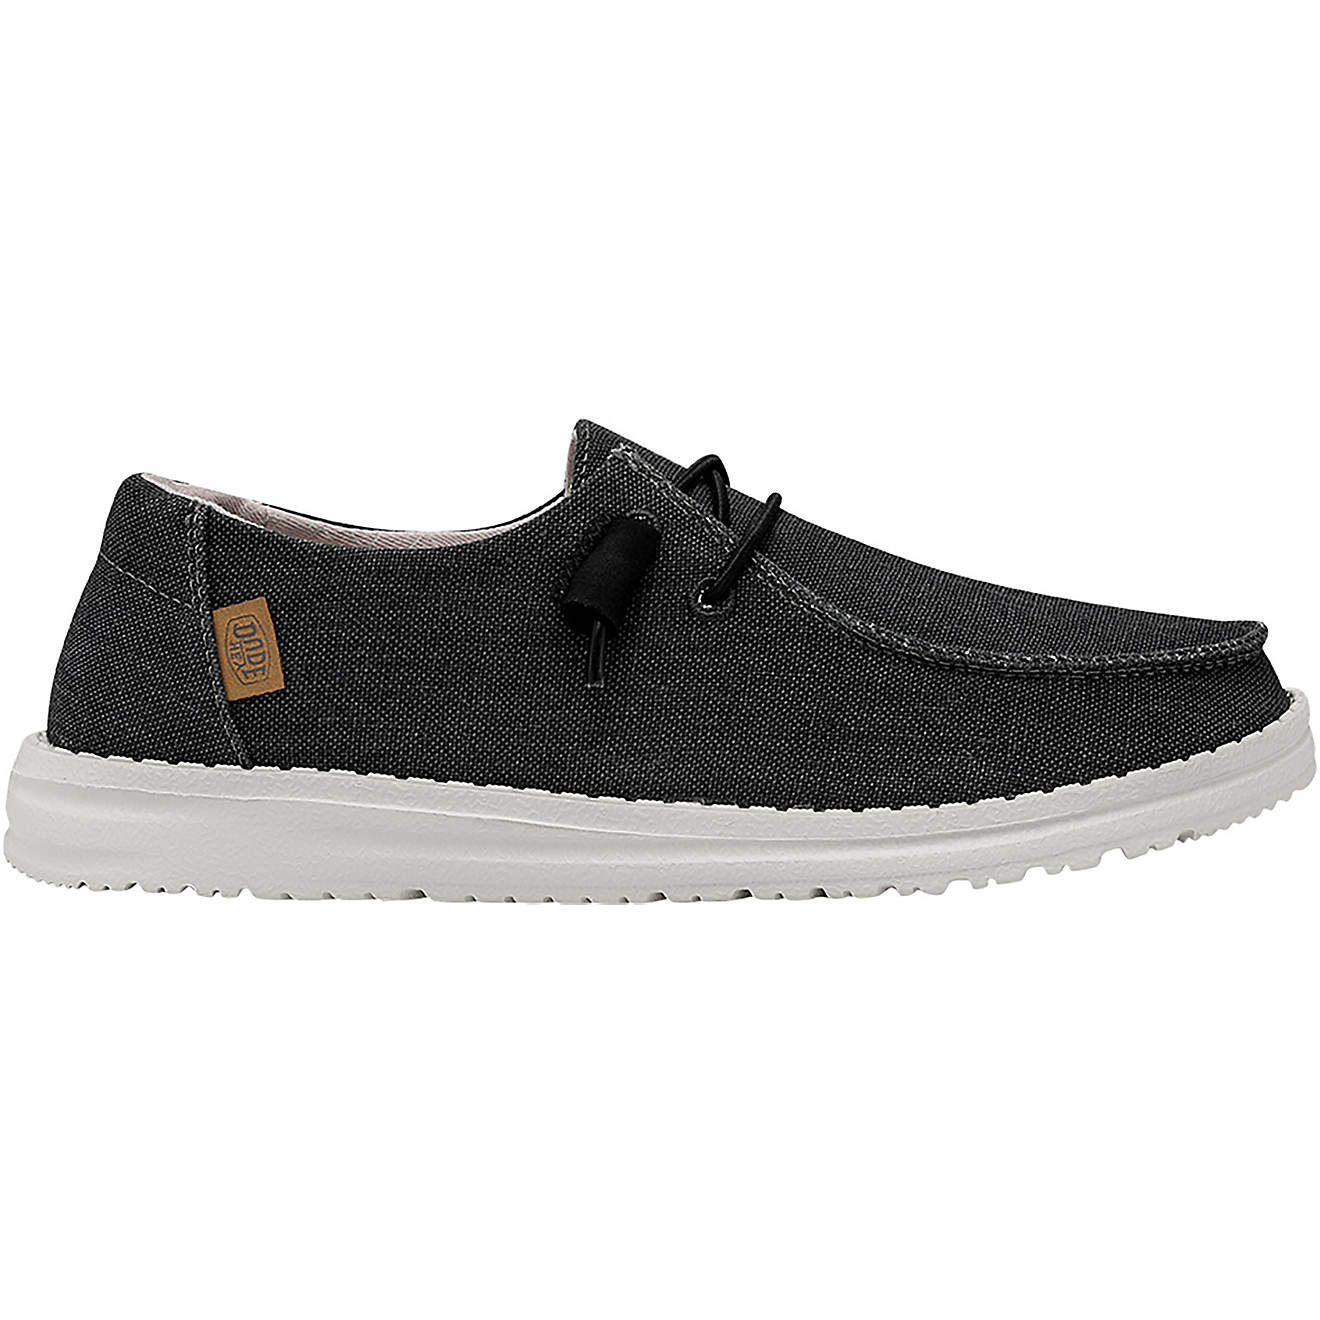 HEYDUDE Women's Wendy Chambray Slip-On Shoes